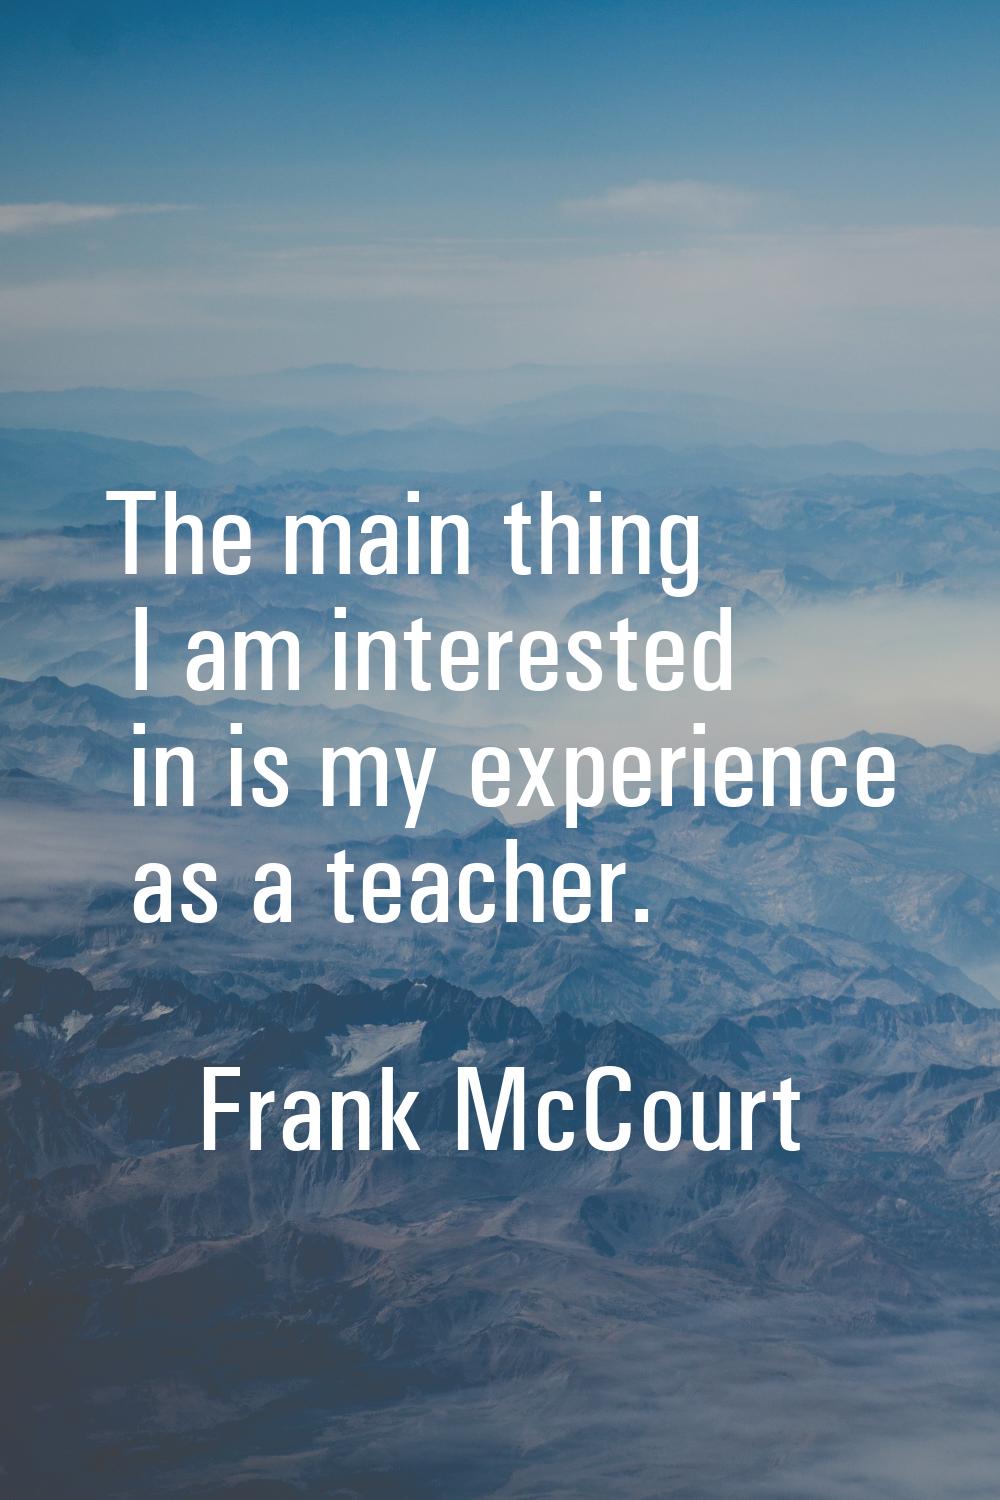 The main thing I am interested in is my experience as a teacher.